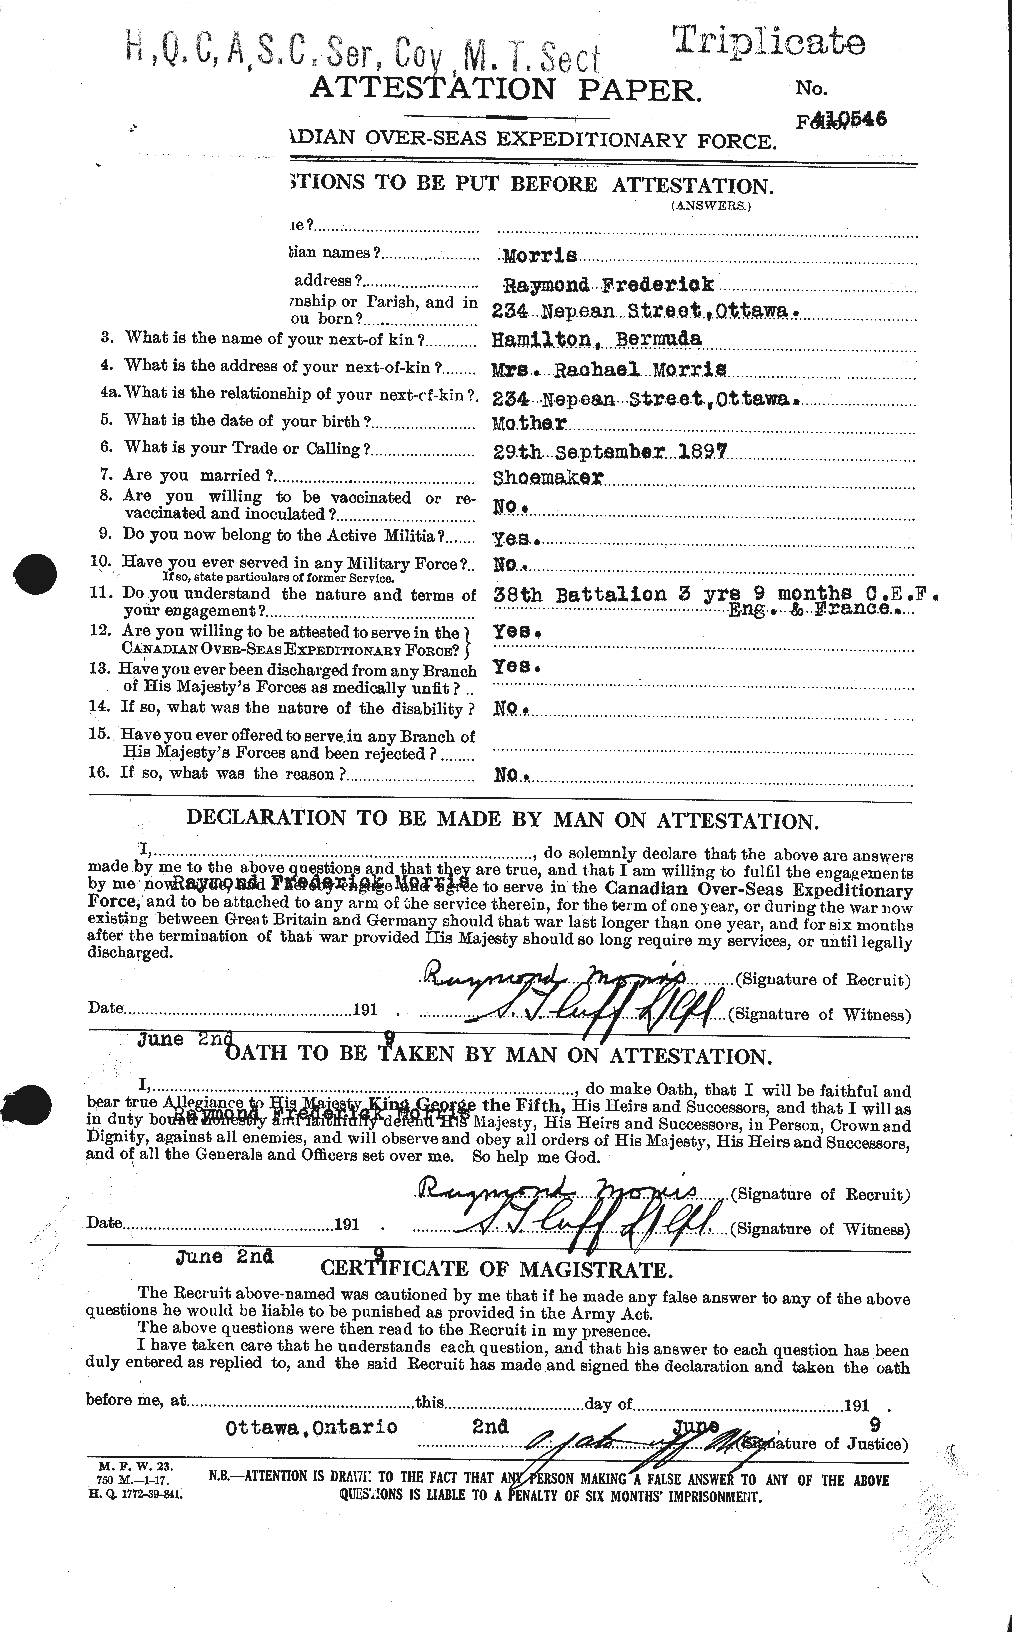 Personnel Records of the First World War - CEF 508627a